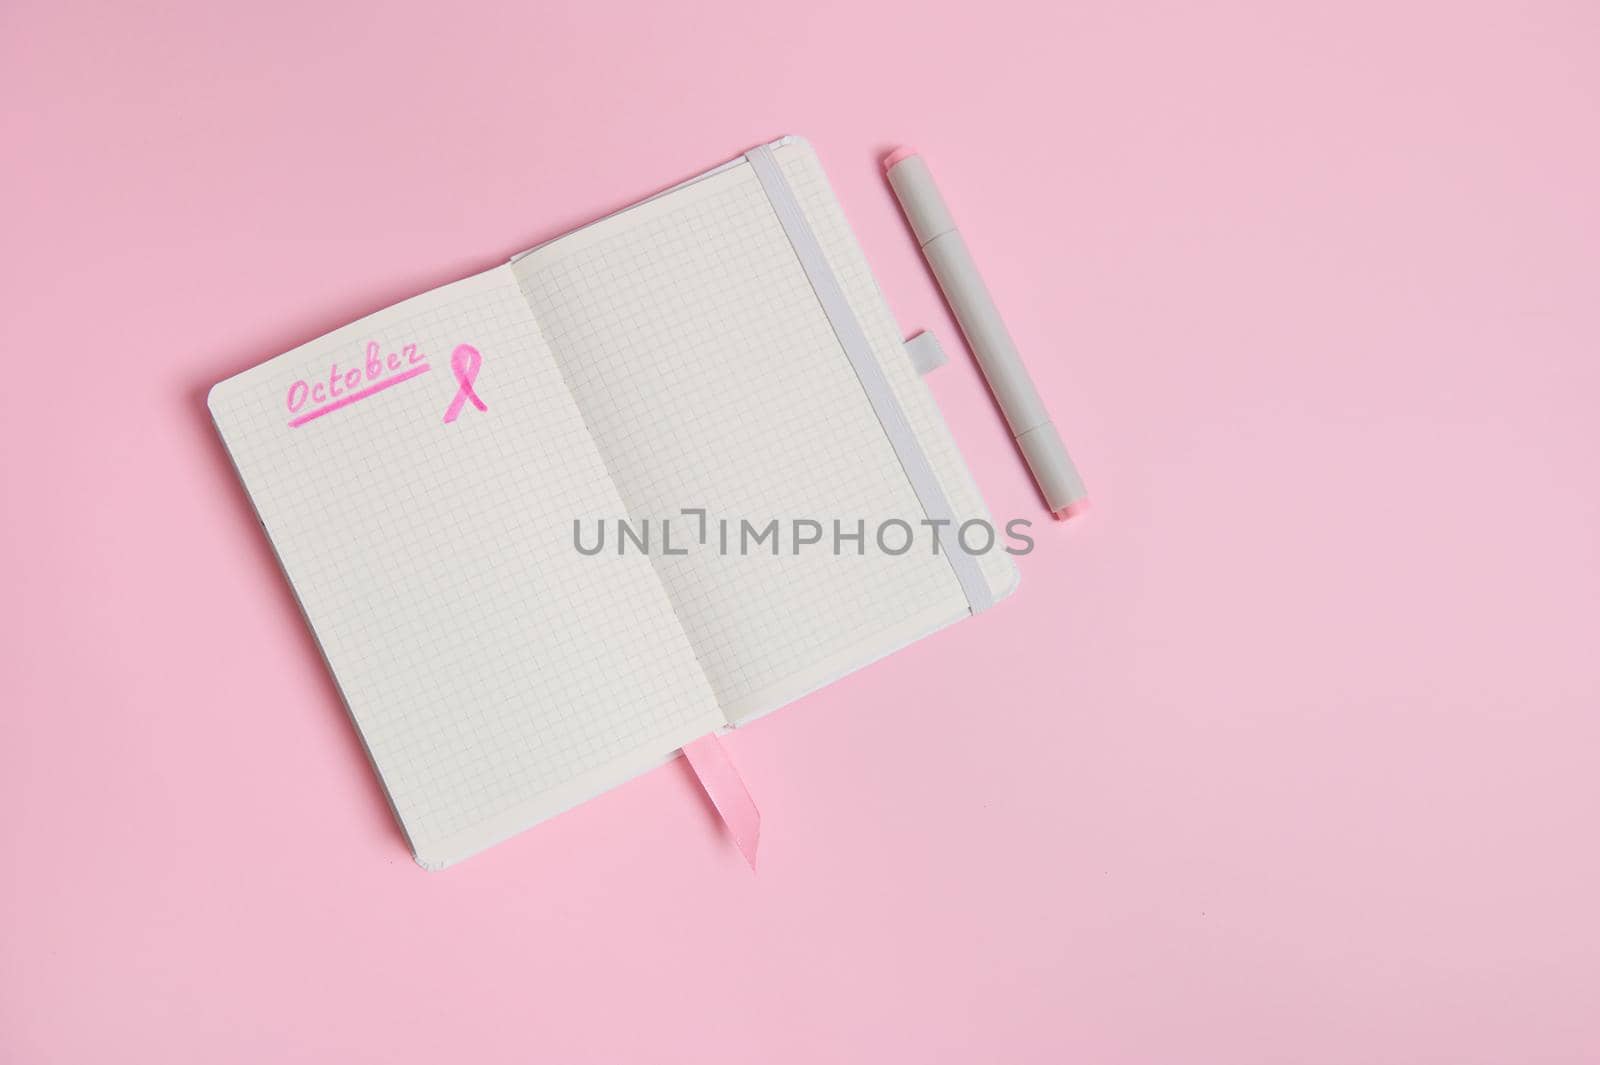 Lettering 1 st October on a diary and a pink ribbon on an empty blank paper sheet, isolated on pink background with copy space by artgf